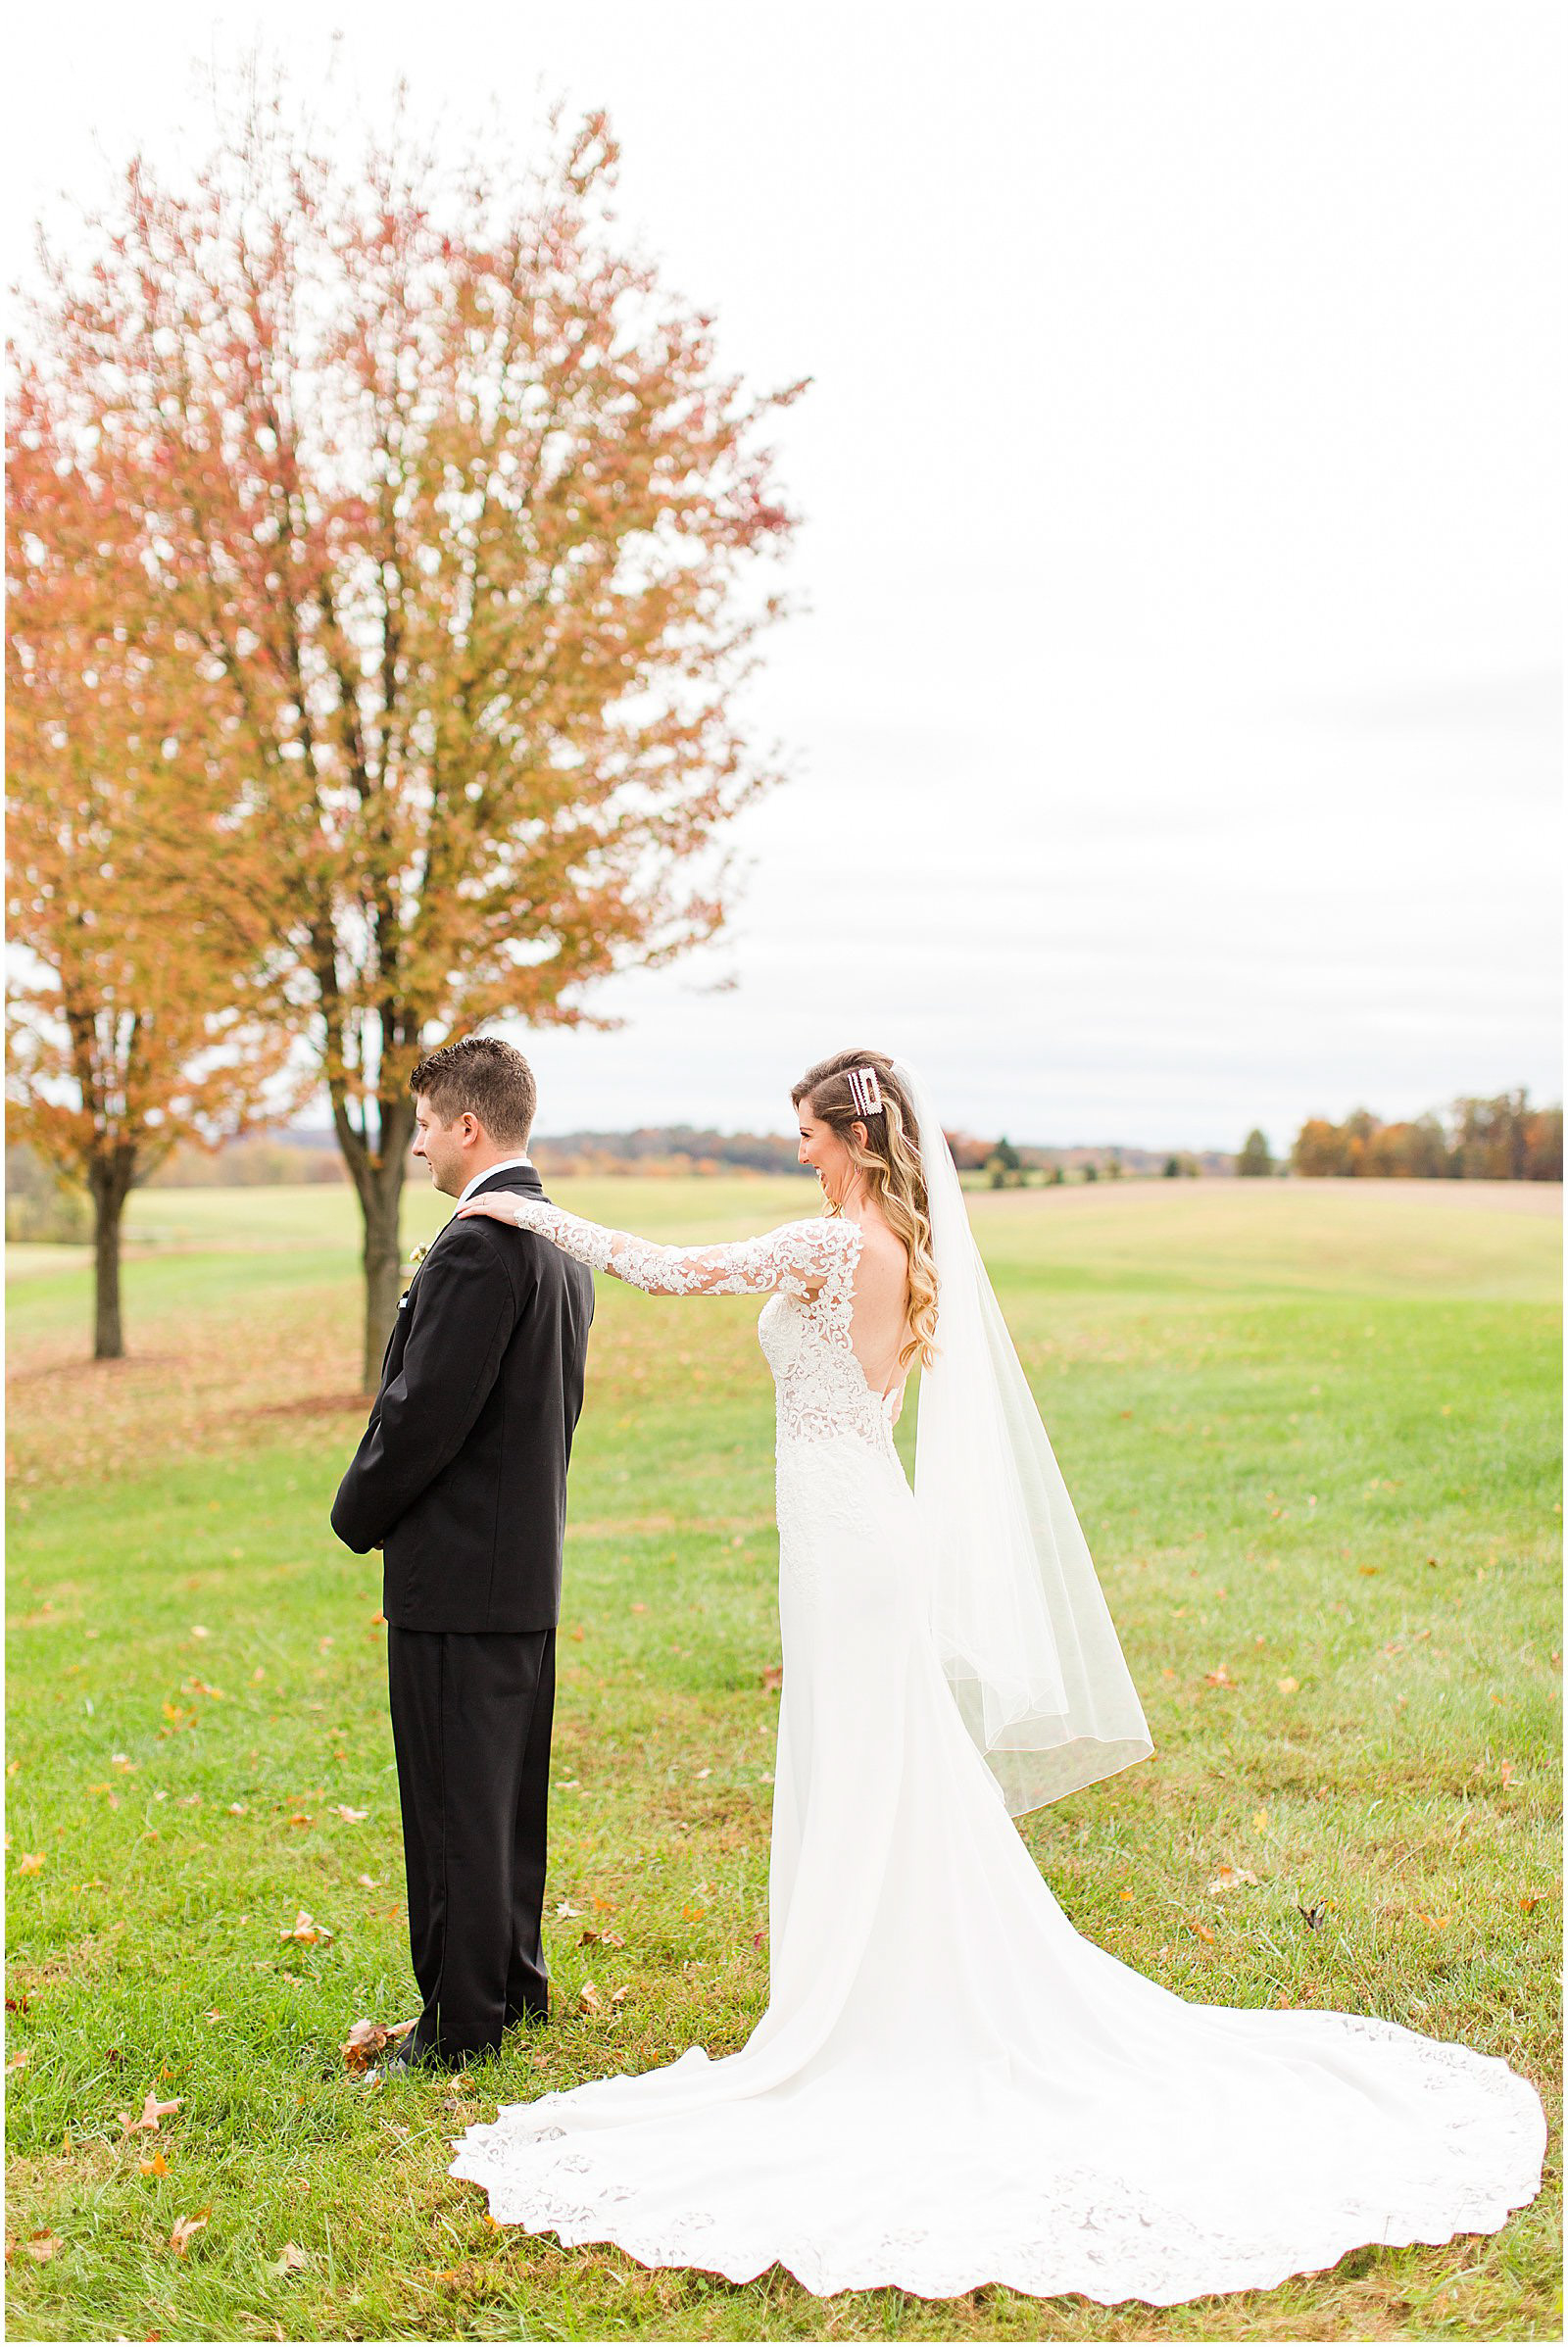 A Romantic Fall Wedding in Ferdinand, IN | Tori and Kyle | Bret and Brandie Photography 0050.jpg